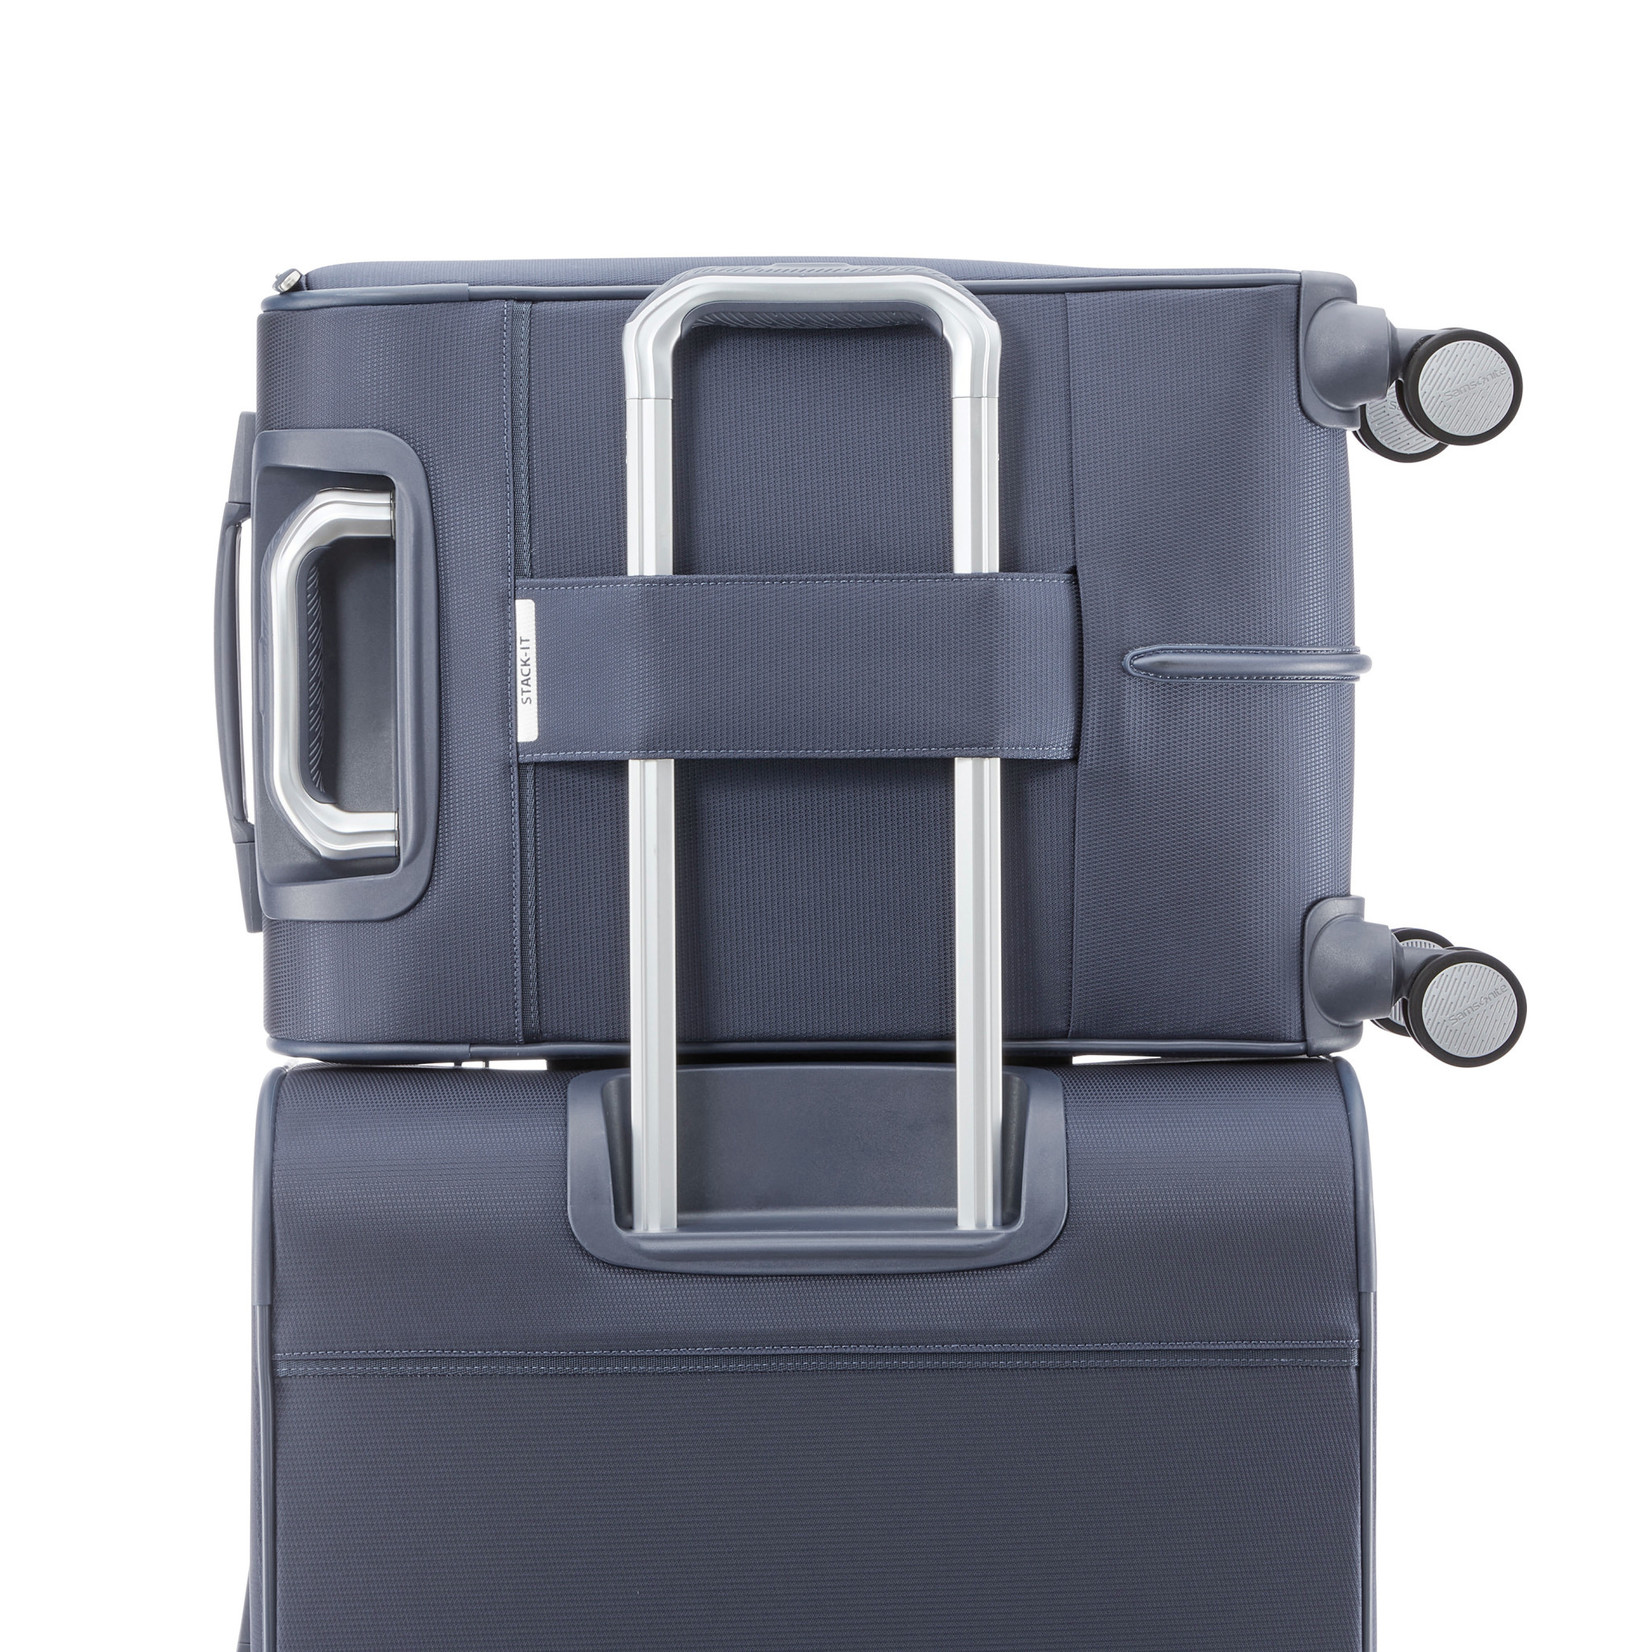 SAMSONITE CANADA ASCENTRA CARRY-ON SPINNER